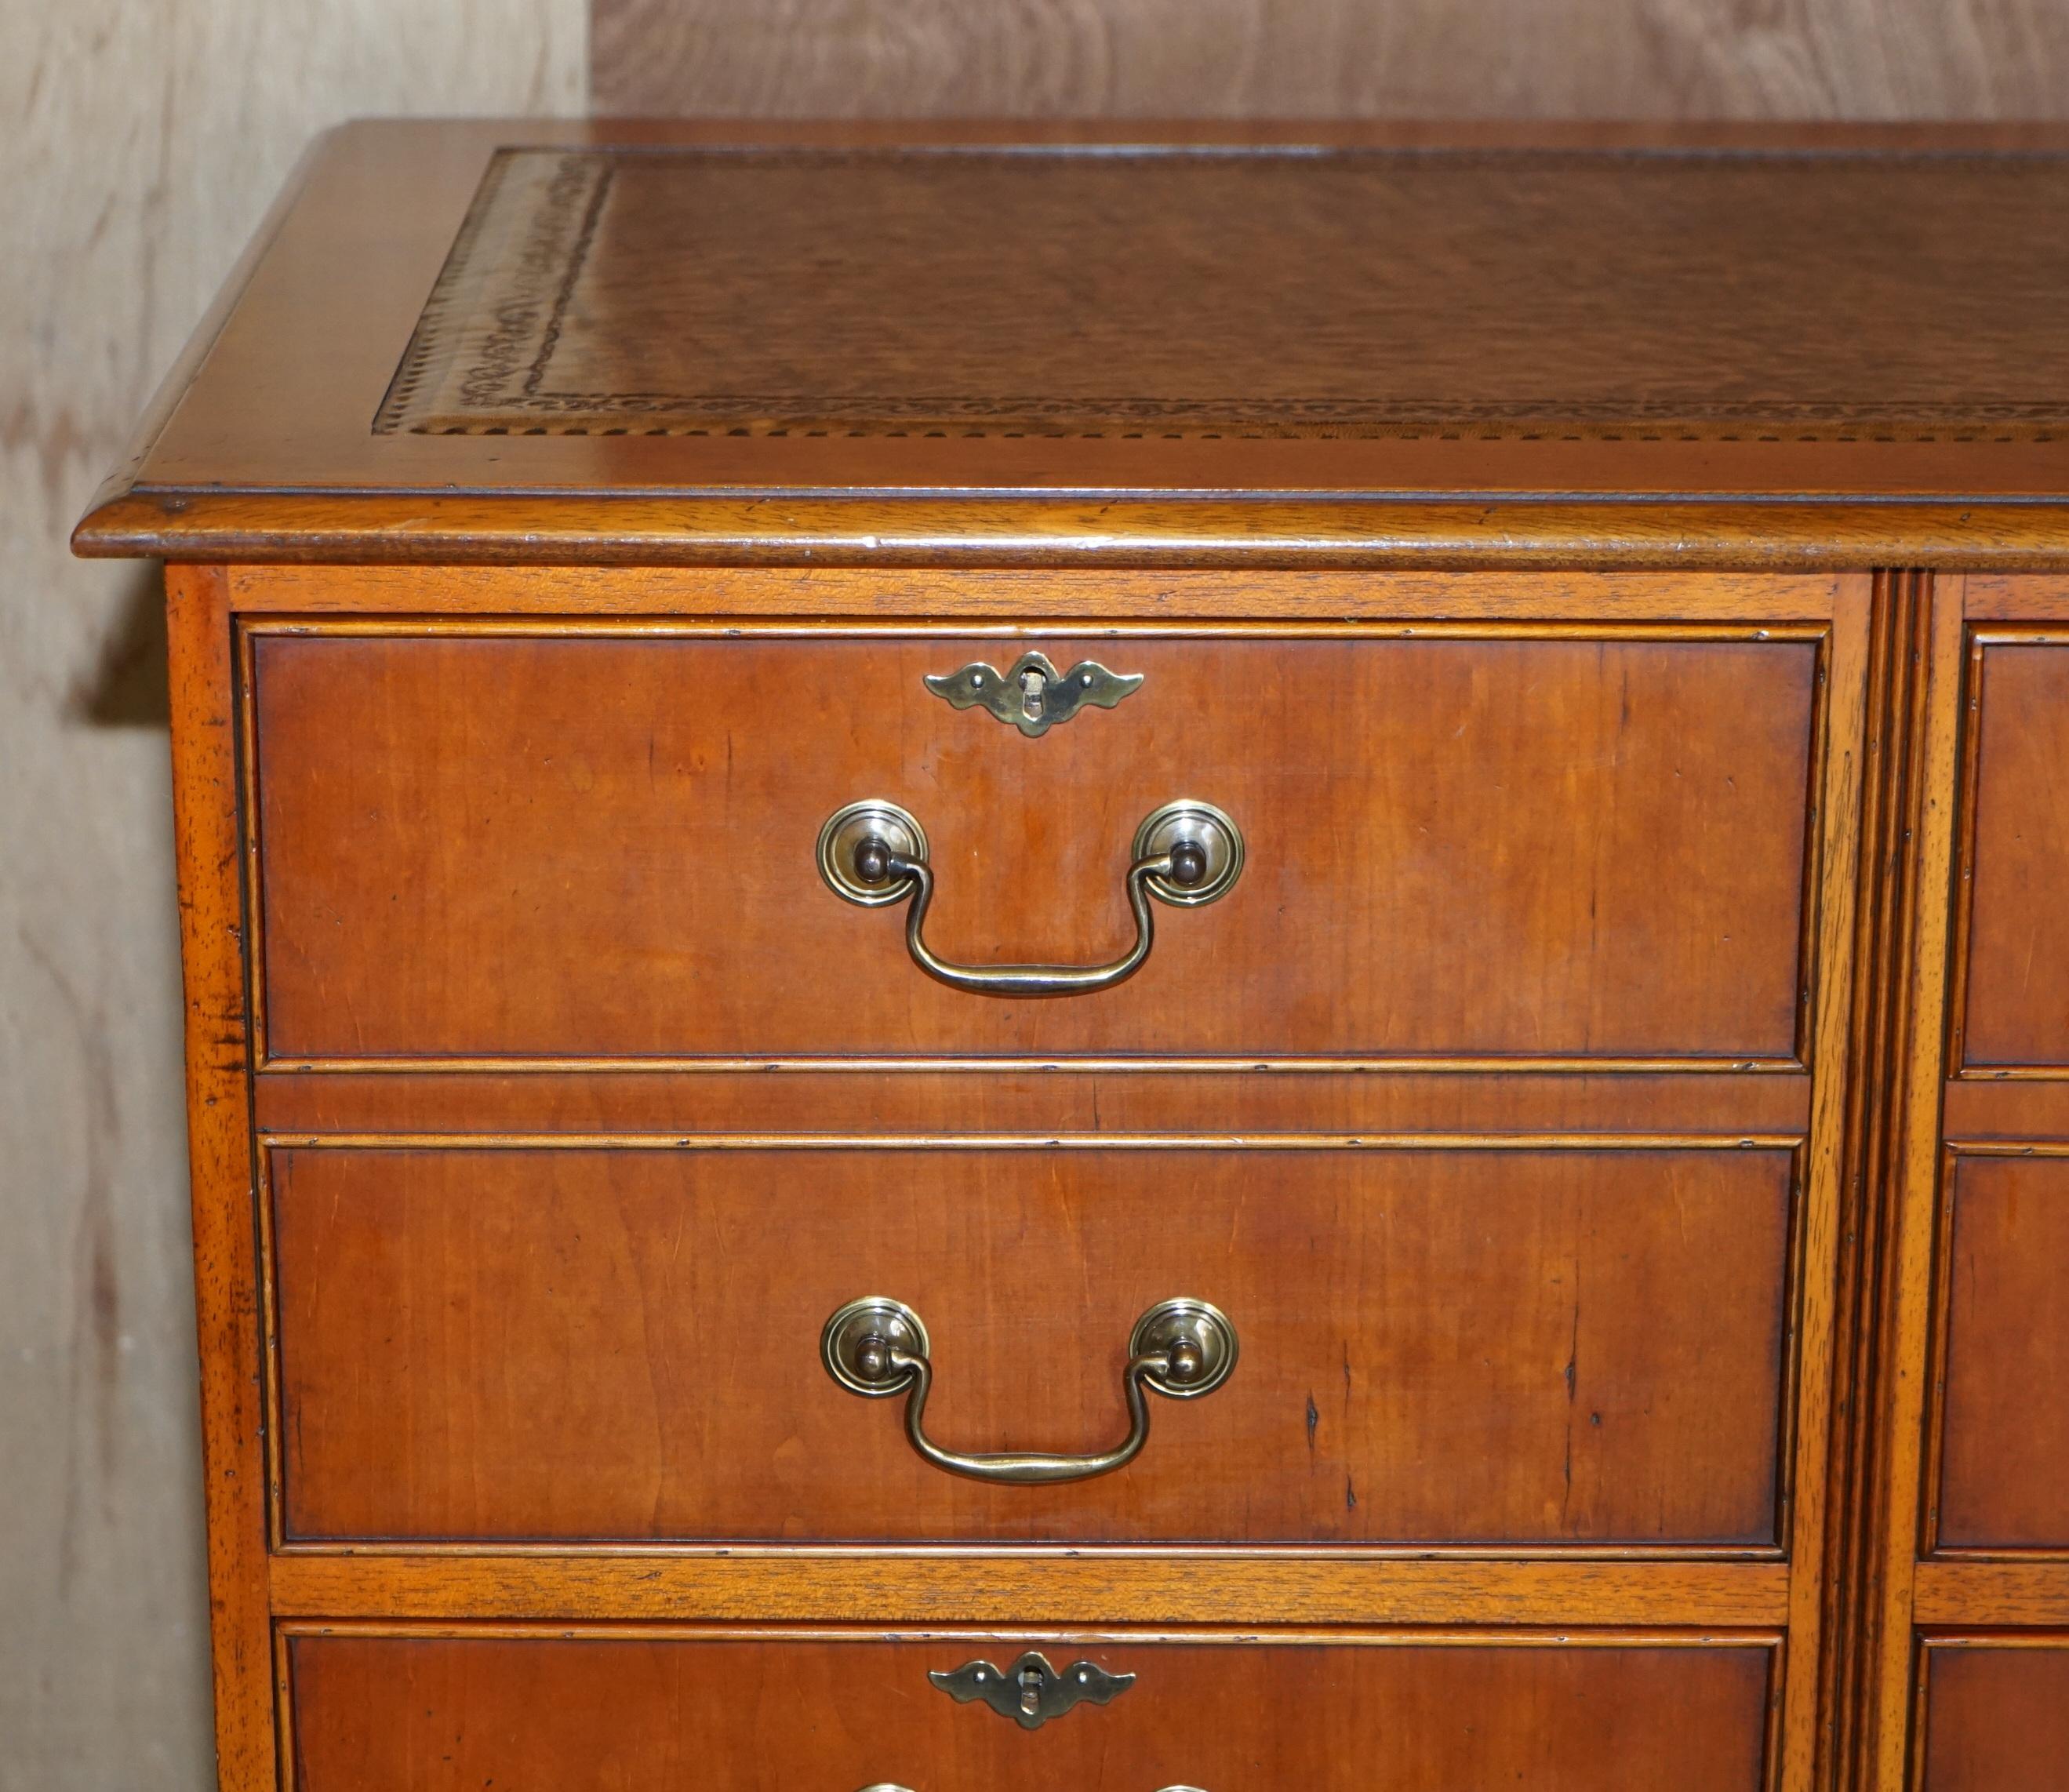 Art Deco Stunning Yew Wood Brown Leather Double Filing Cabinet for at Home Office Study